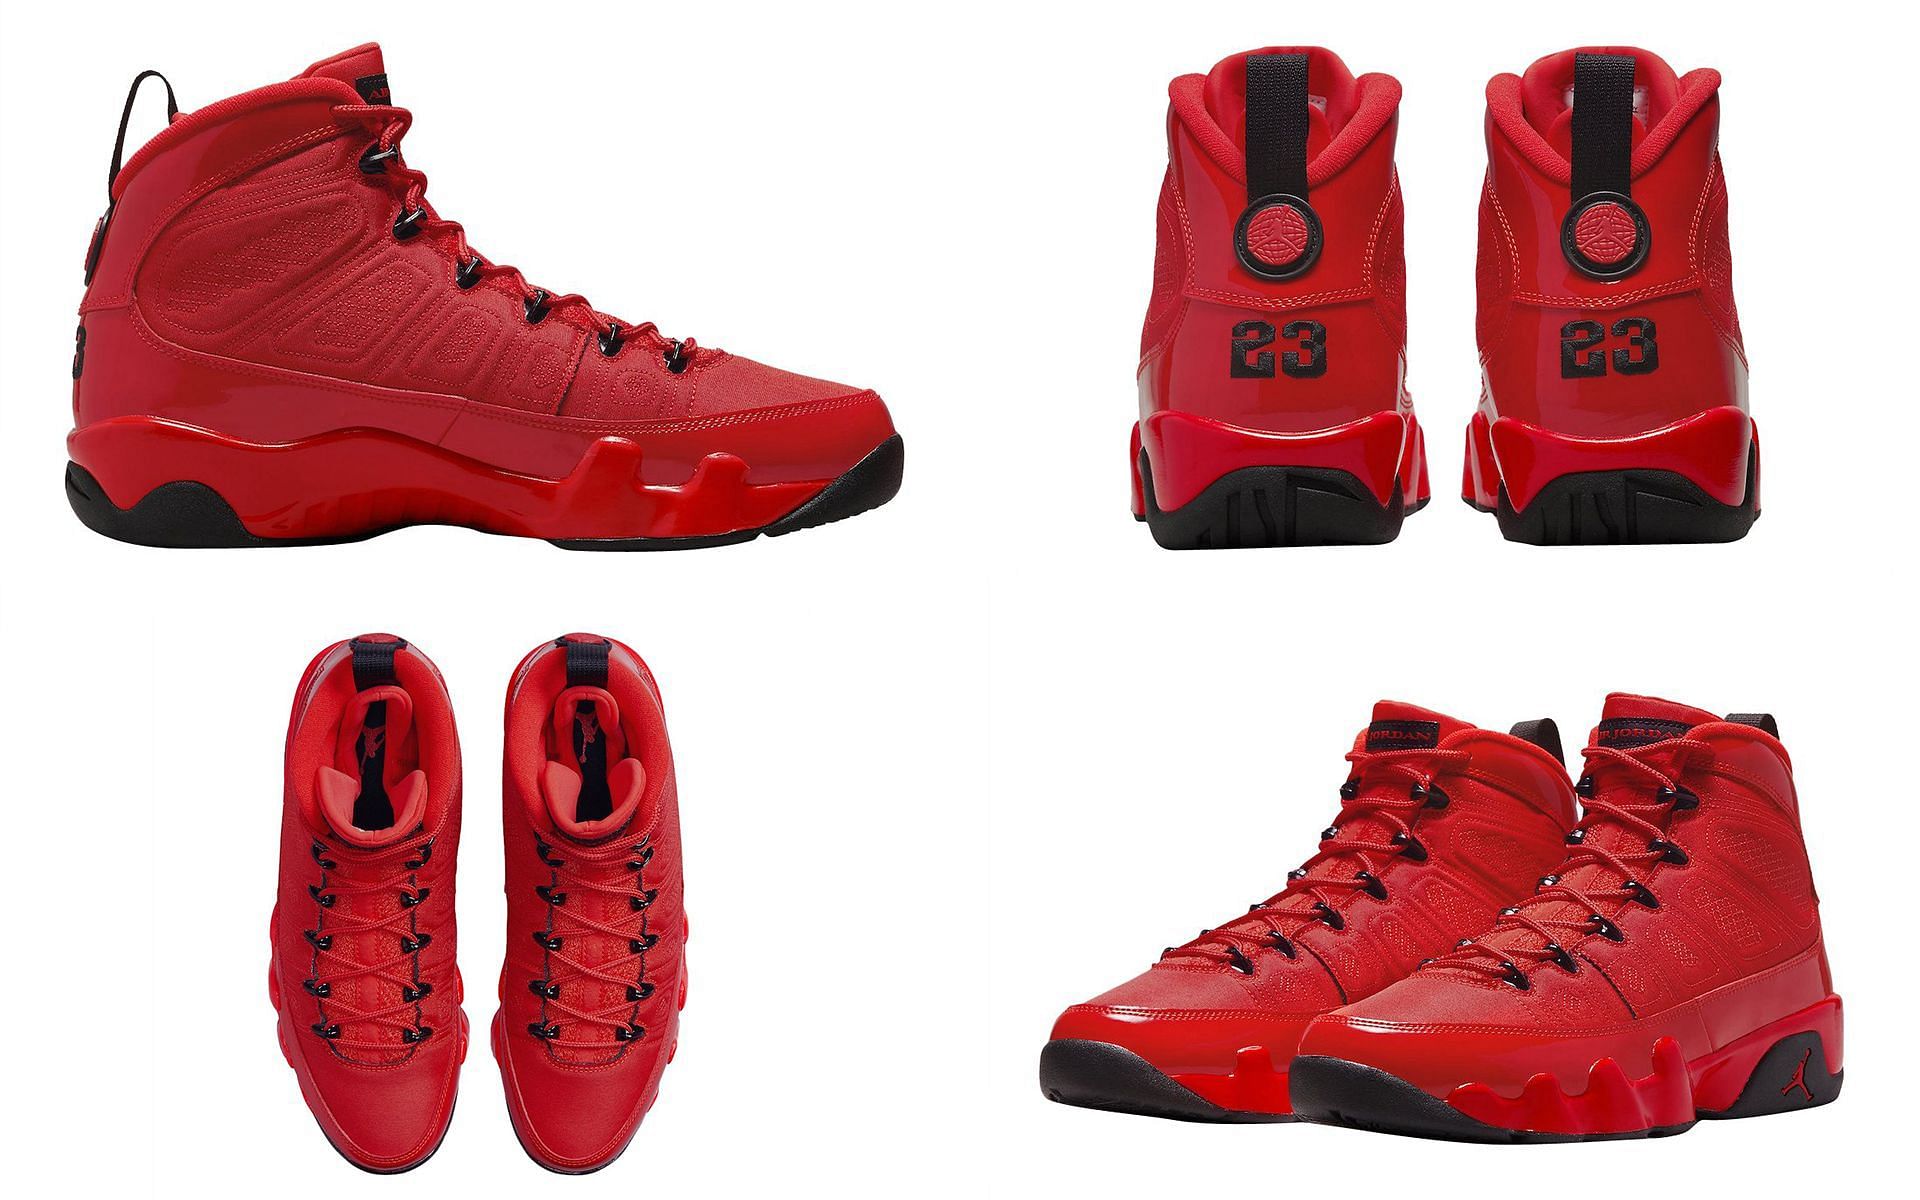 Take a closer look at the Chile Red colorway (Image via Sportskeeda)